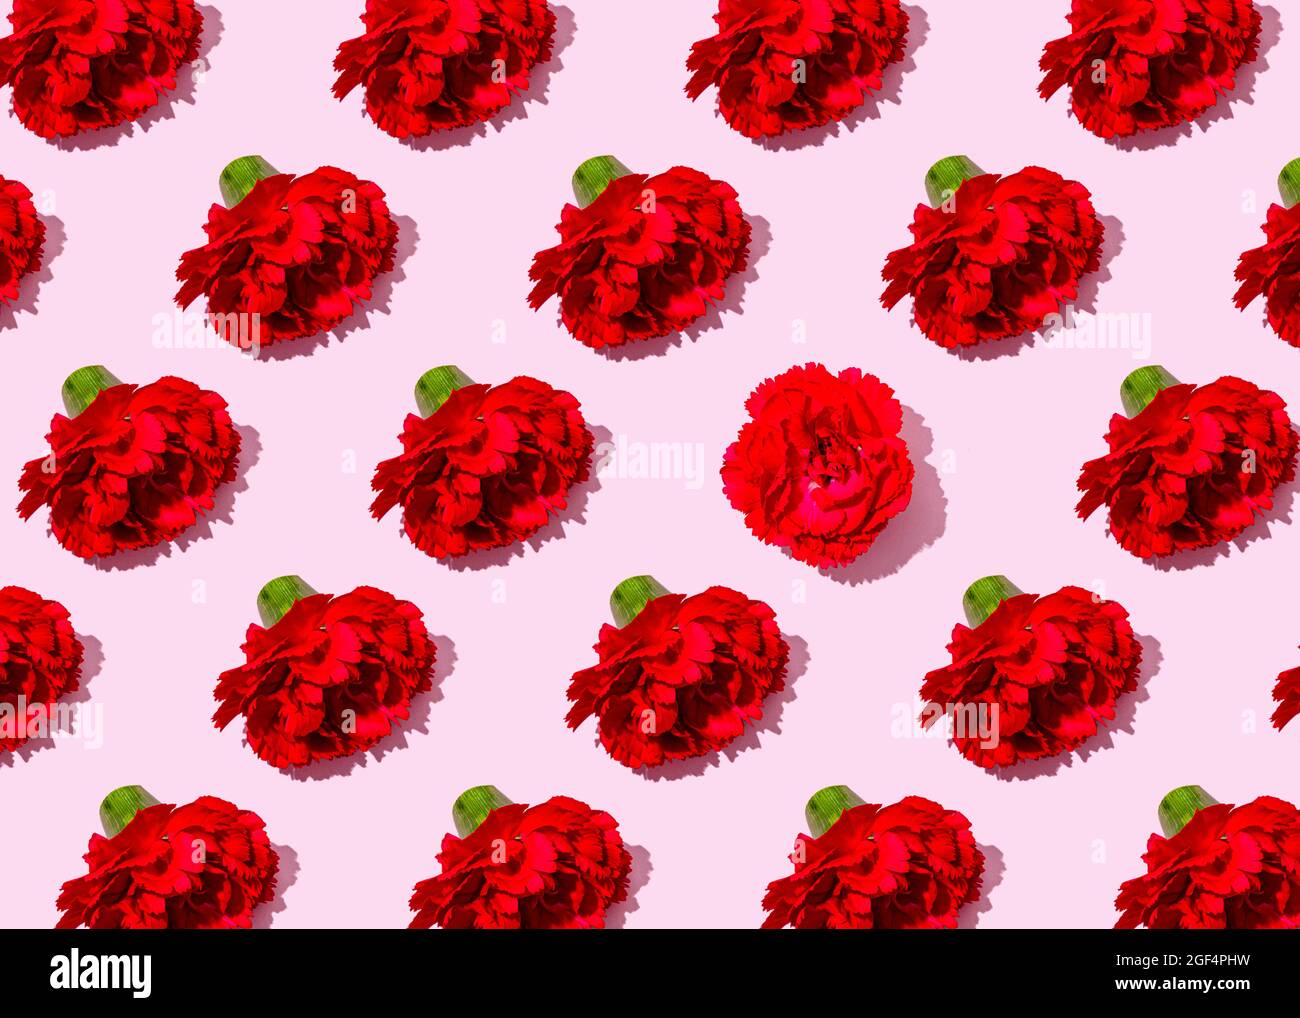 Pattern of heads of red carnation flowers with single one lying in different position Stock Photo